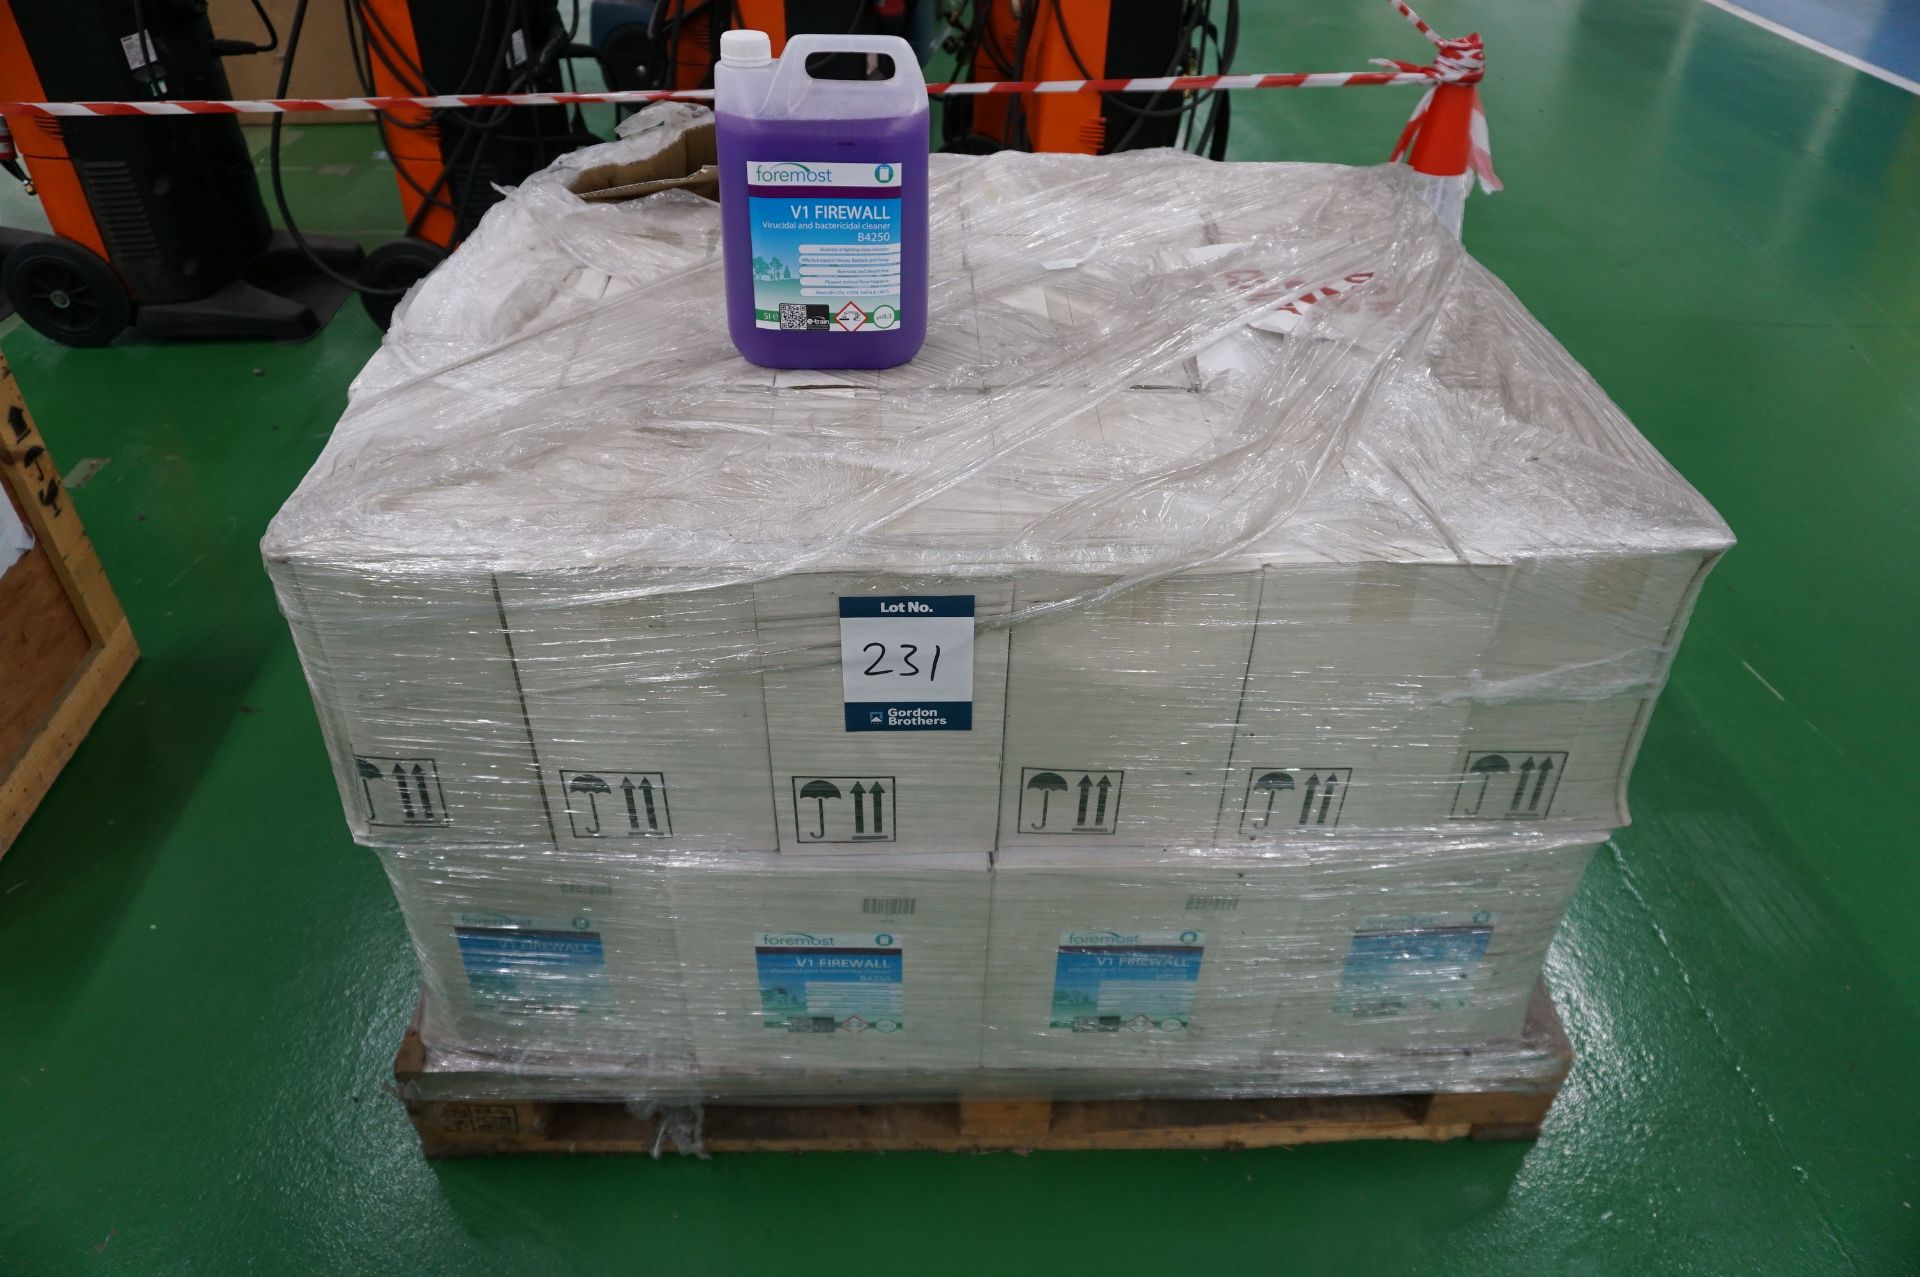 Pallet to contain quantity of Foremost V1 firewall B4250 virucidal and bacterial cleaning agent